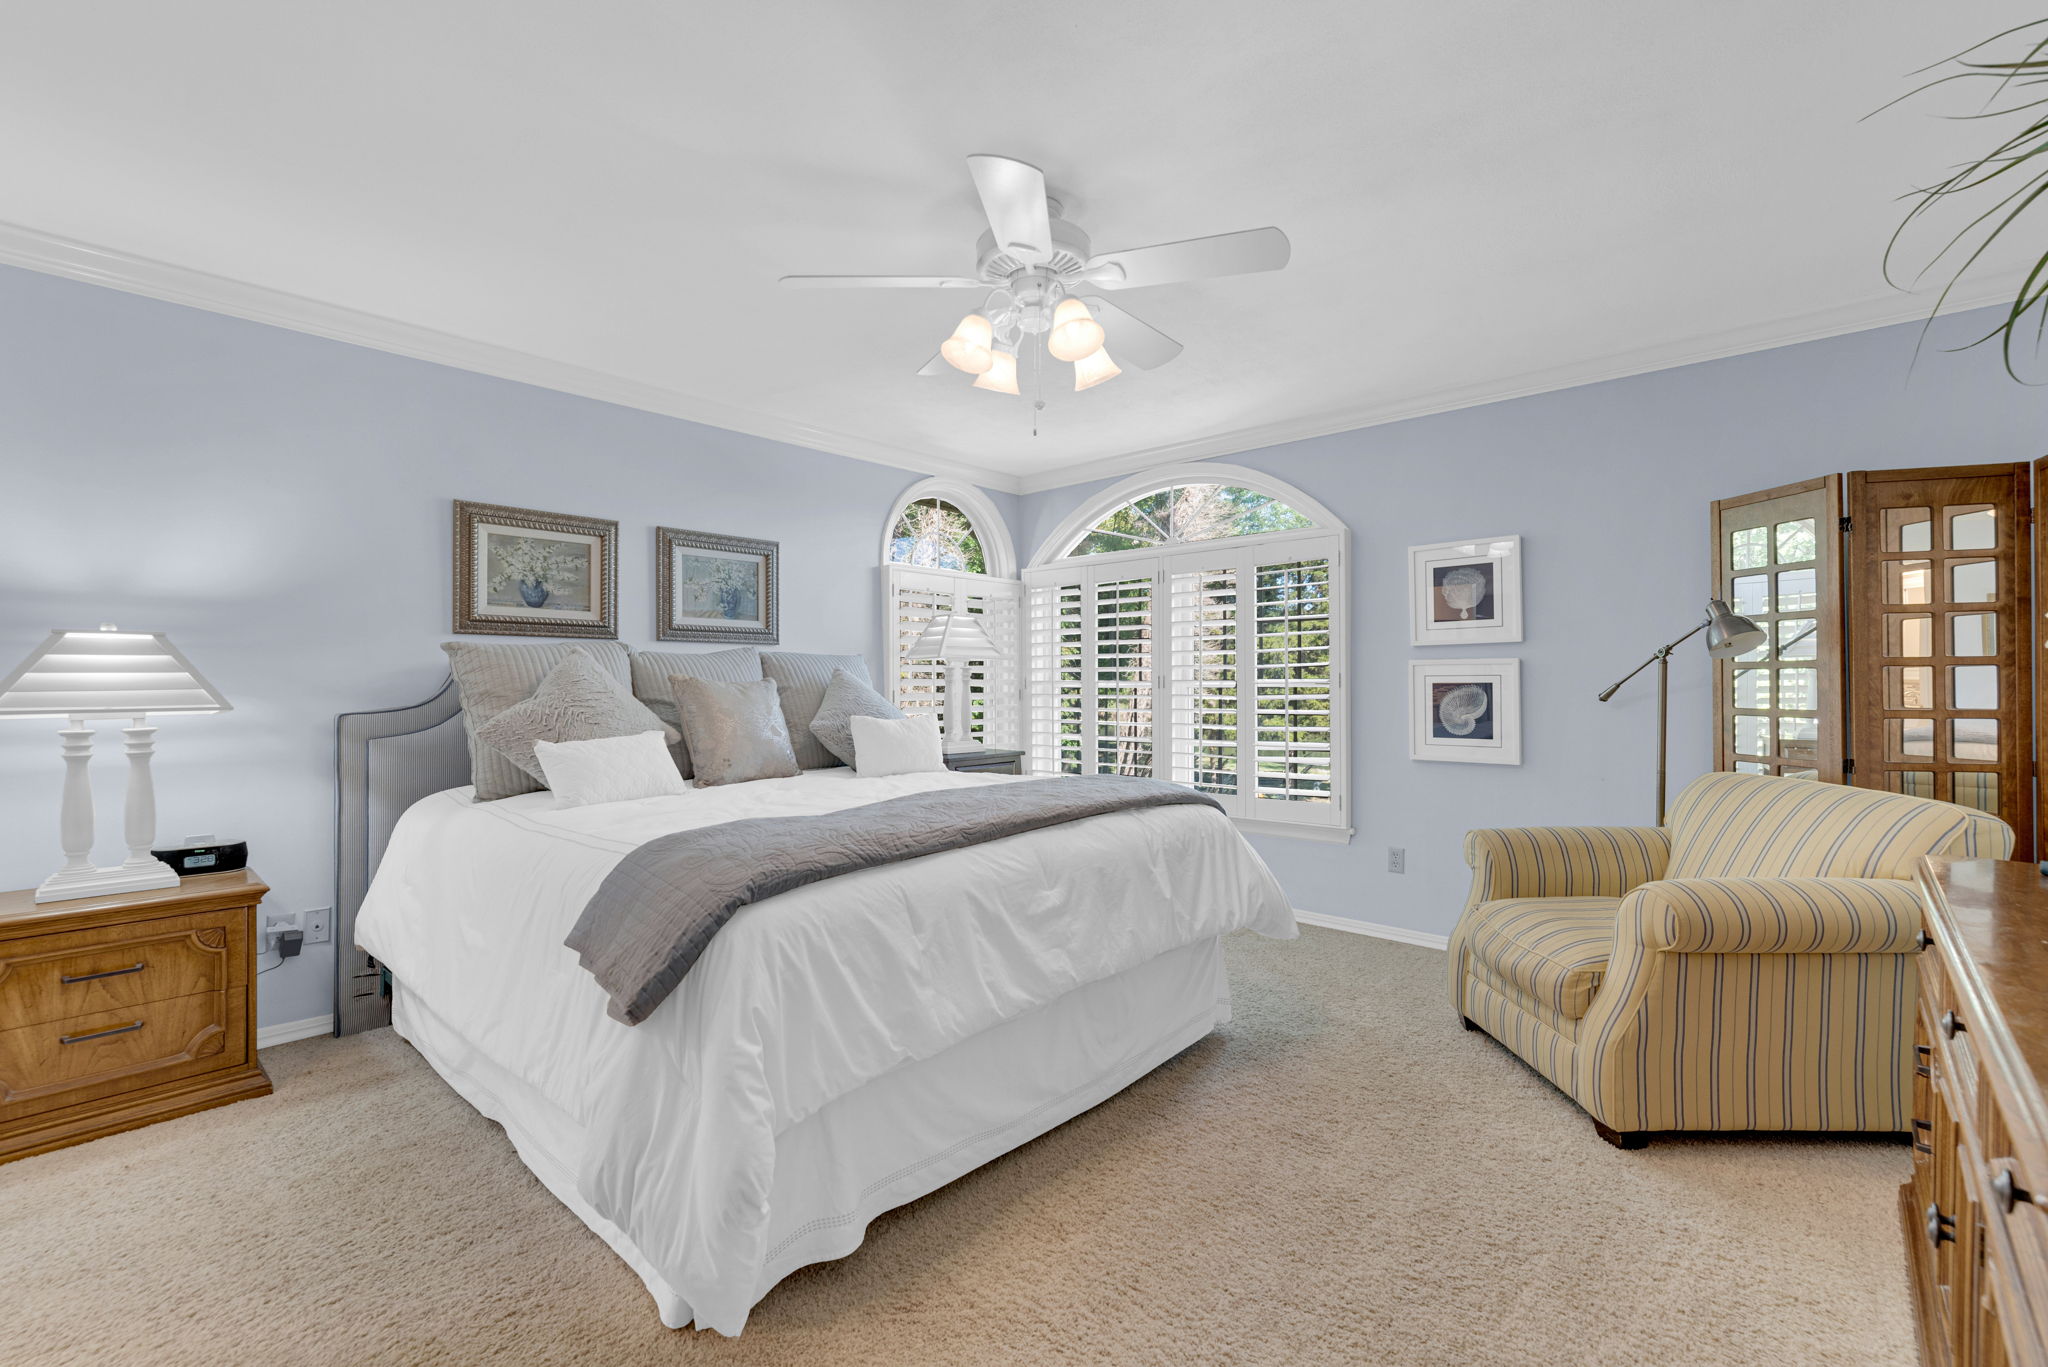 Main Floor Master with Views of the Lake Crown Molding, Plantation / Energy Efficient Shutters